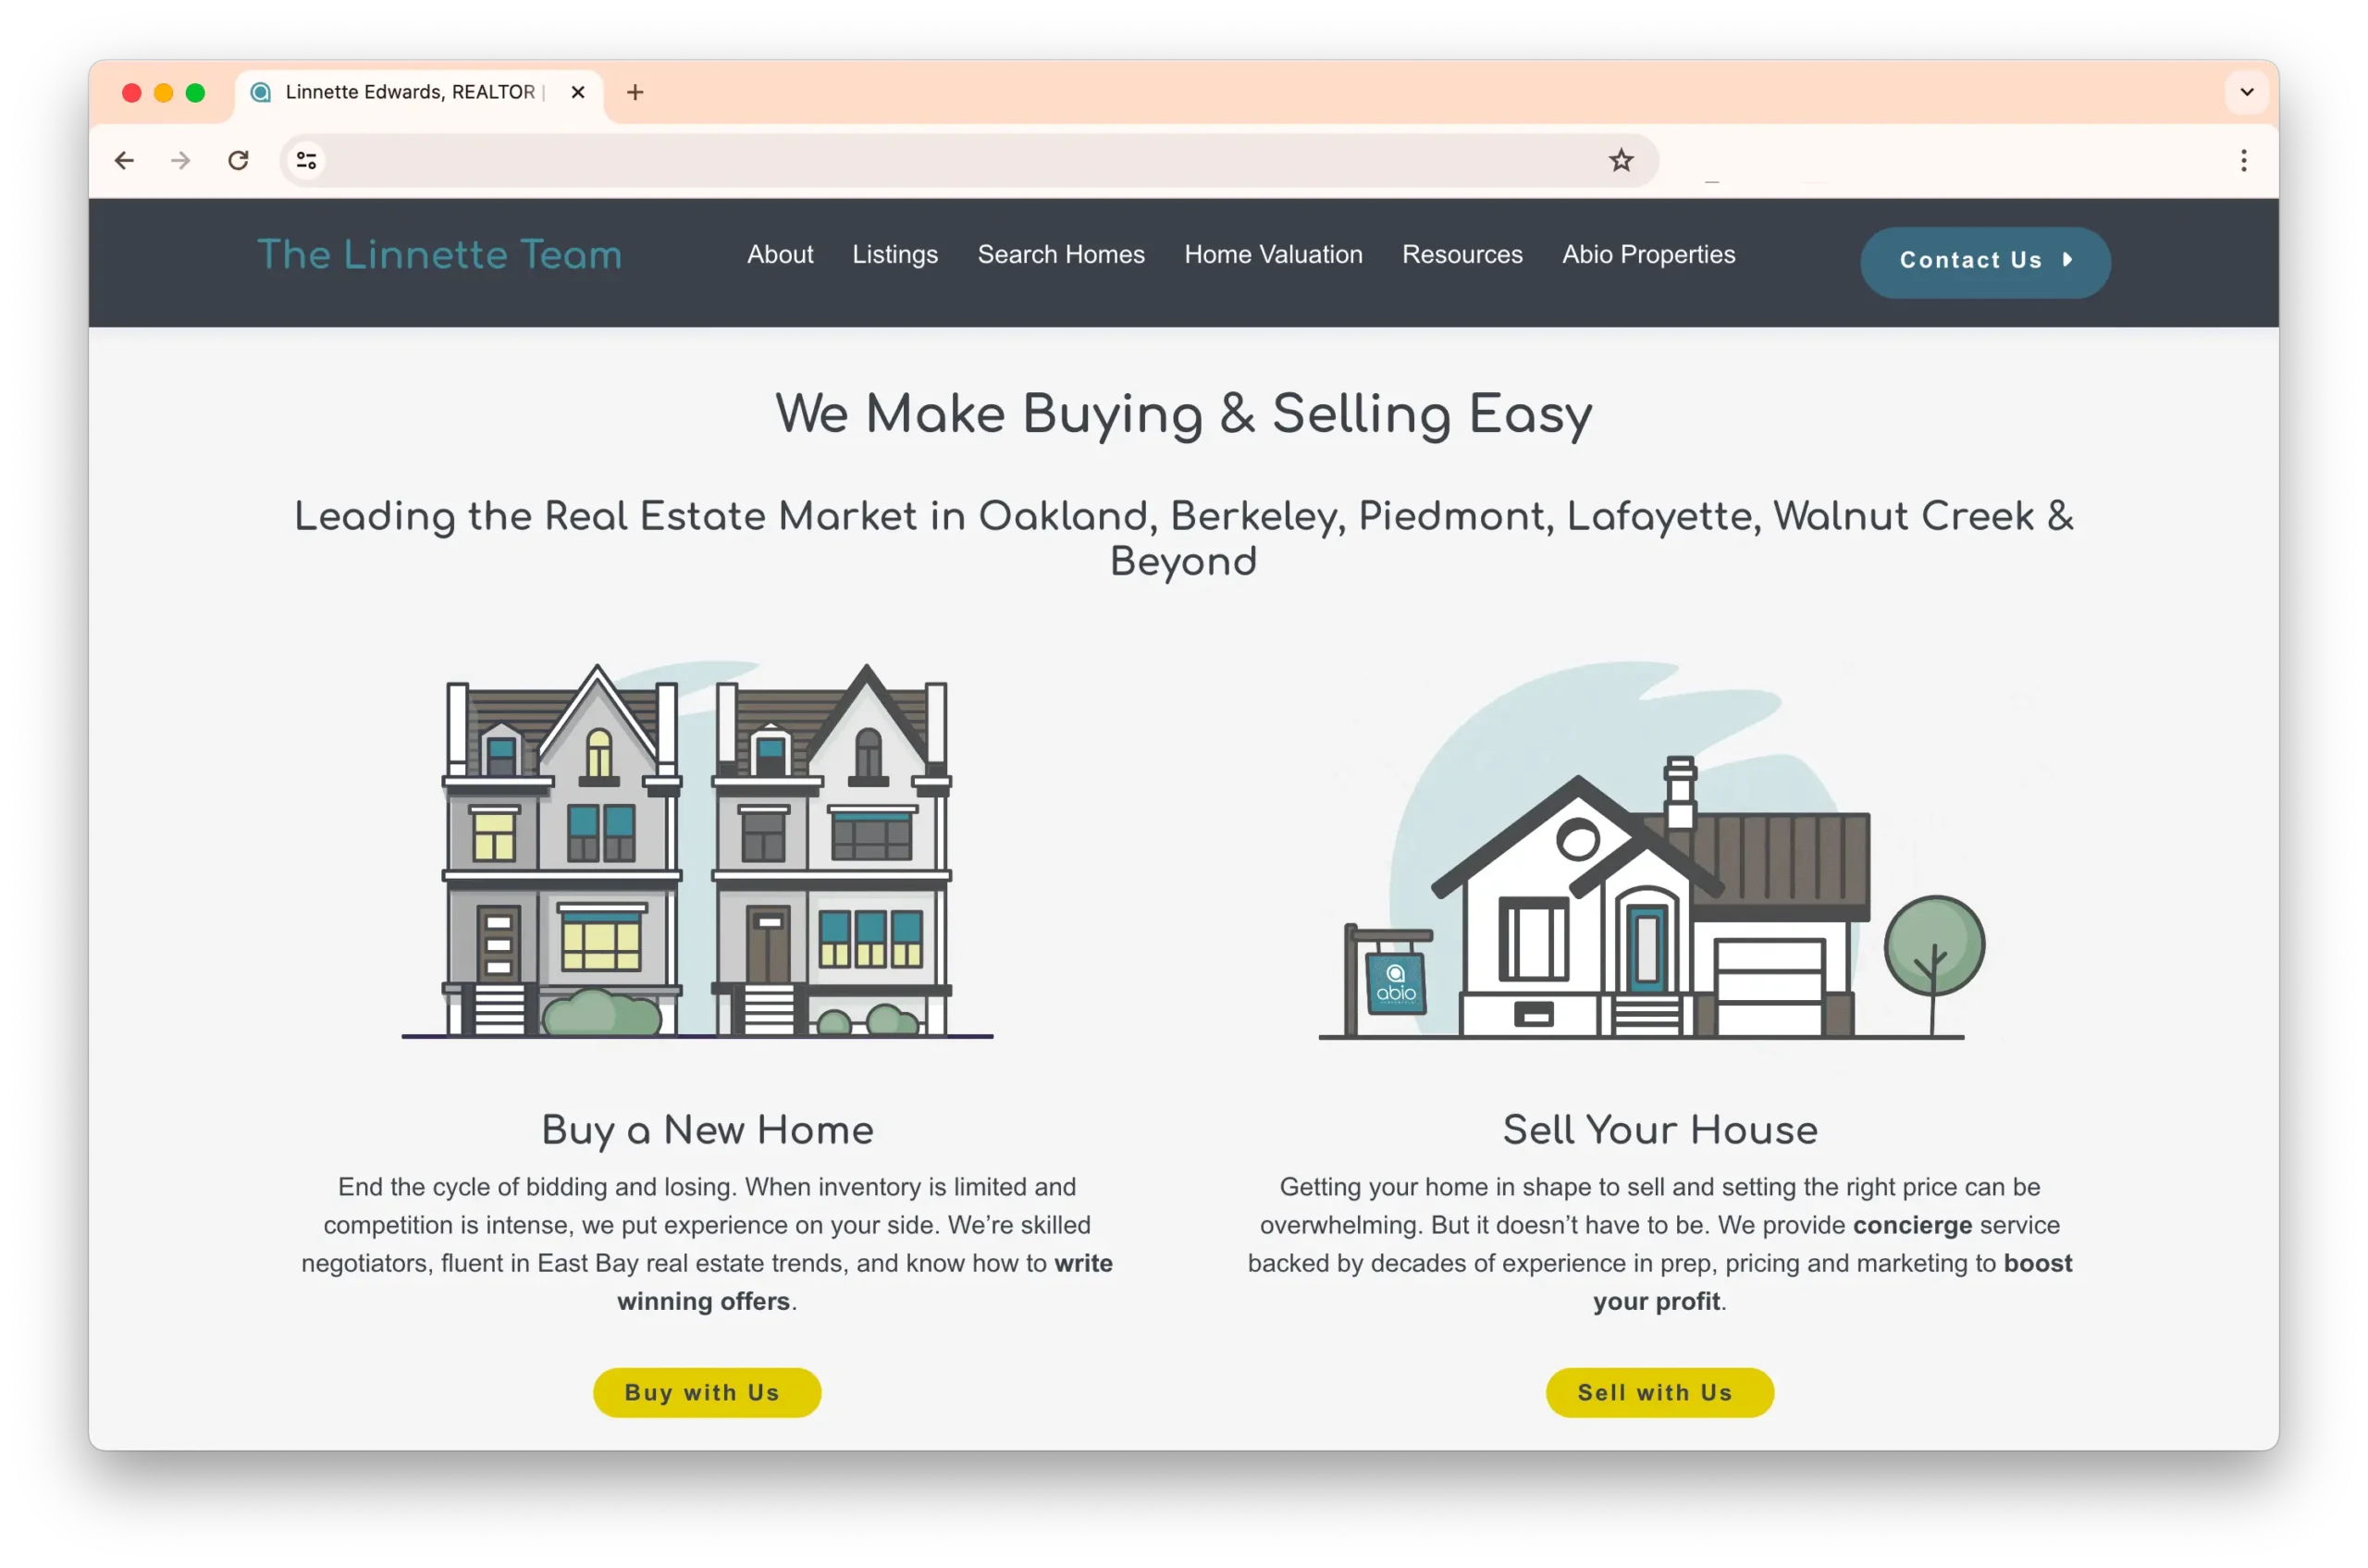 A webpage for Abio Properties explaining their real estate services. There are two illustrated sections: "Buy a New Home" with townhouses and "Sell Your House" with a single-family home. Each section has a call-to-action button.